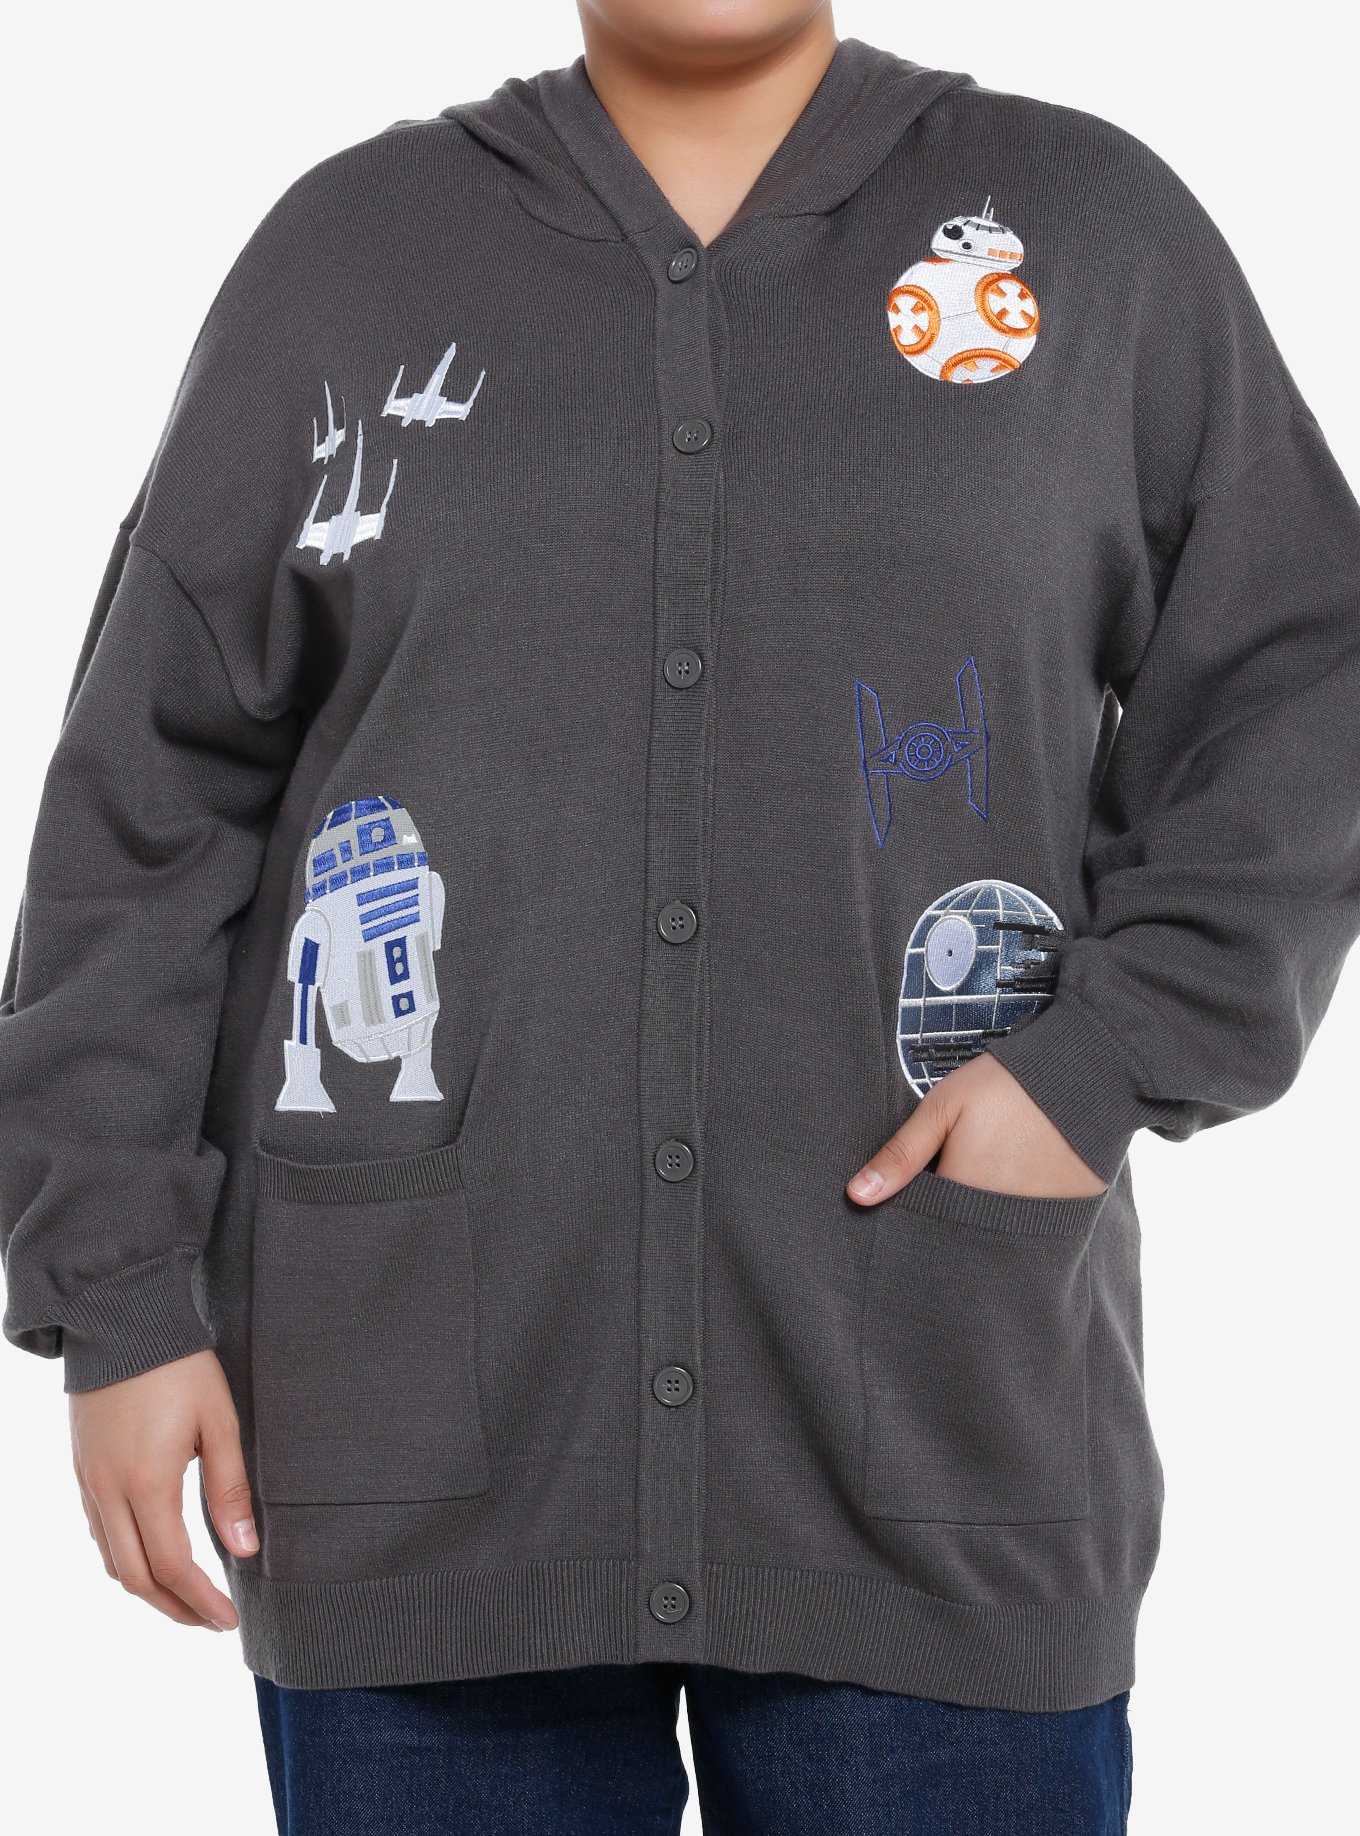 Her Universe Star Wars Droids Hooded Cardigan Plus Size Her Universe Exclusive, , hi-res